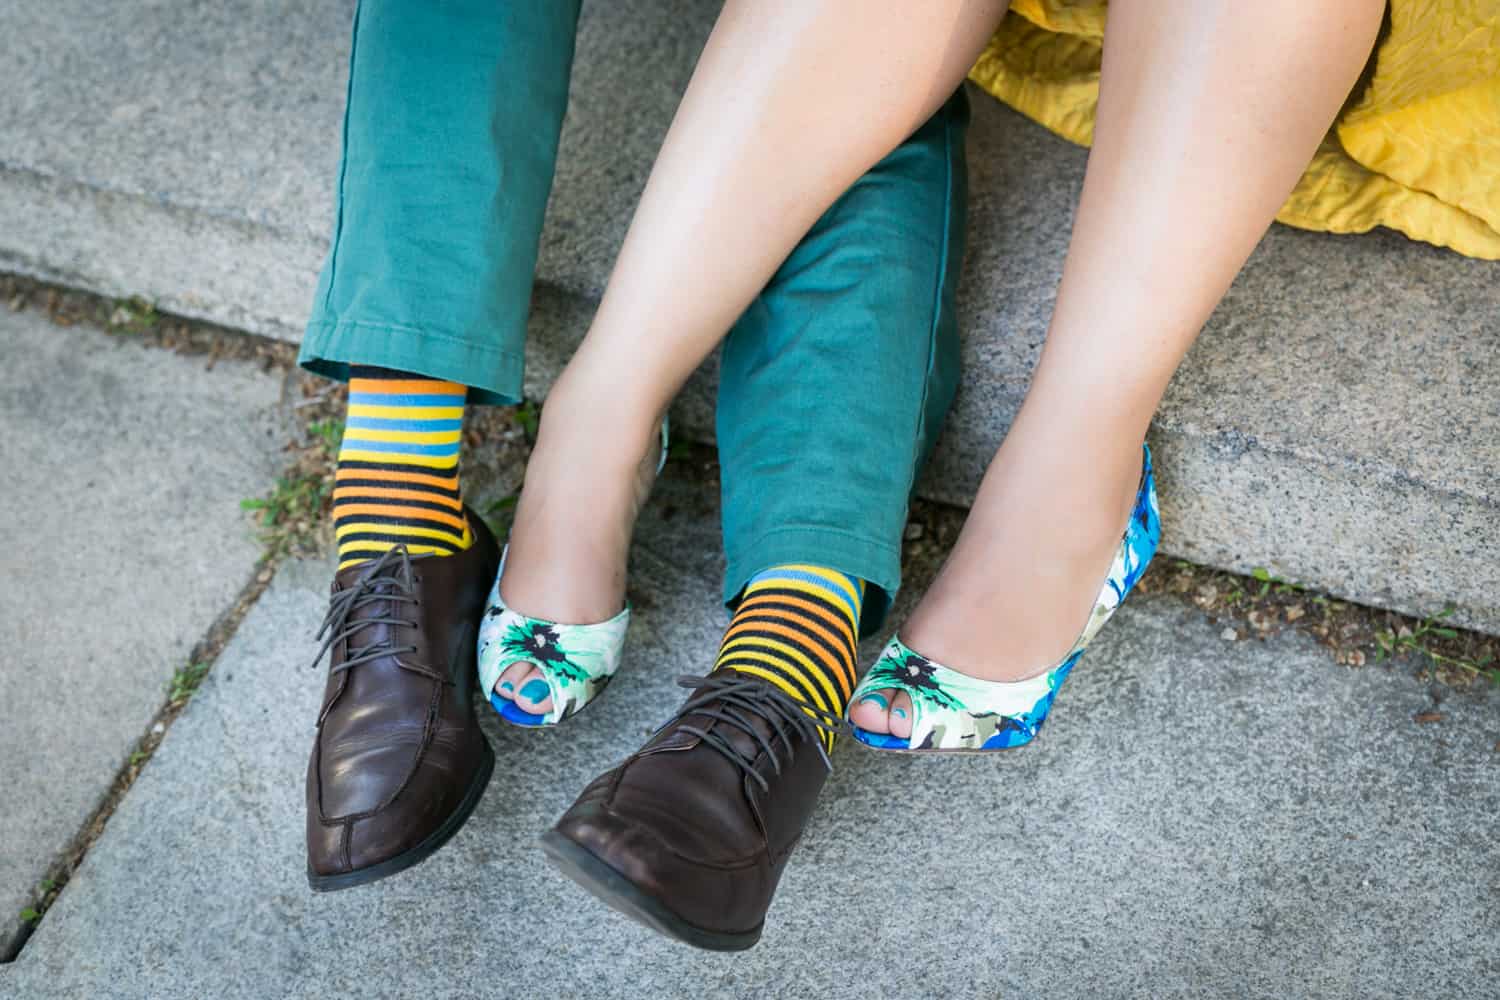 Close up on woman wearing colorful floral heels and man wearing colorful socks and black shoes